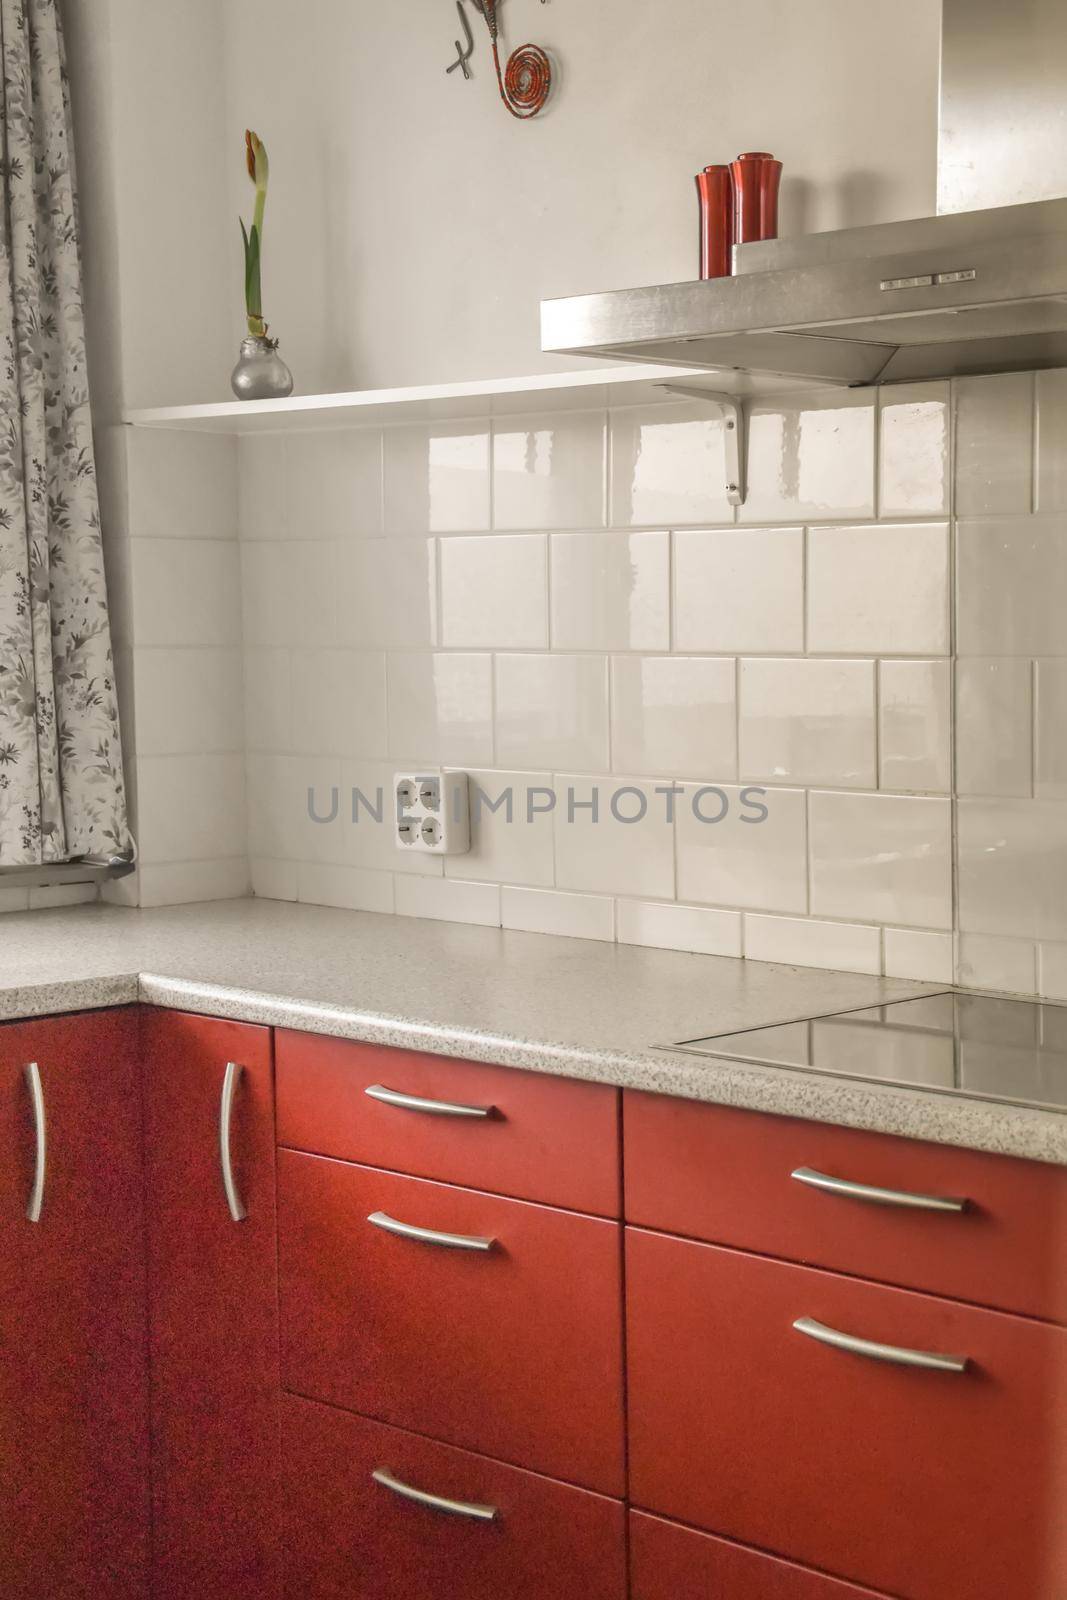 Small kitchen with red furniture and tiled floor in a modern house